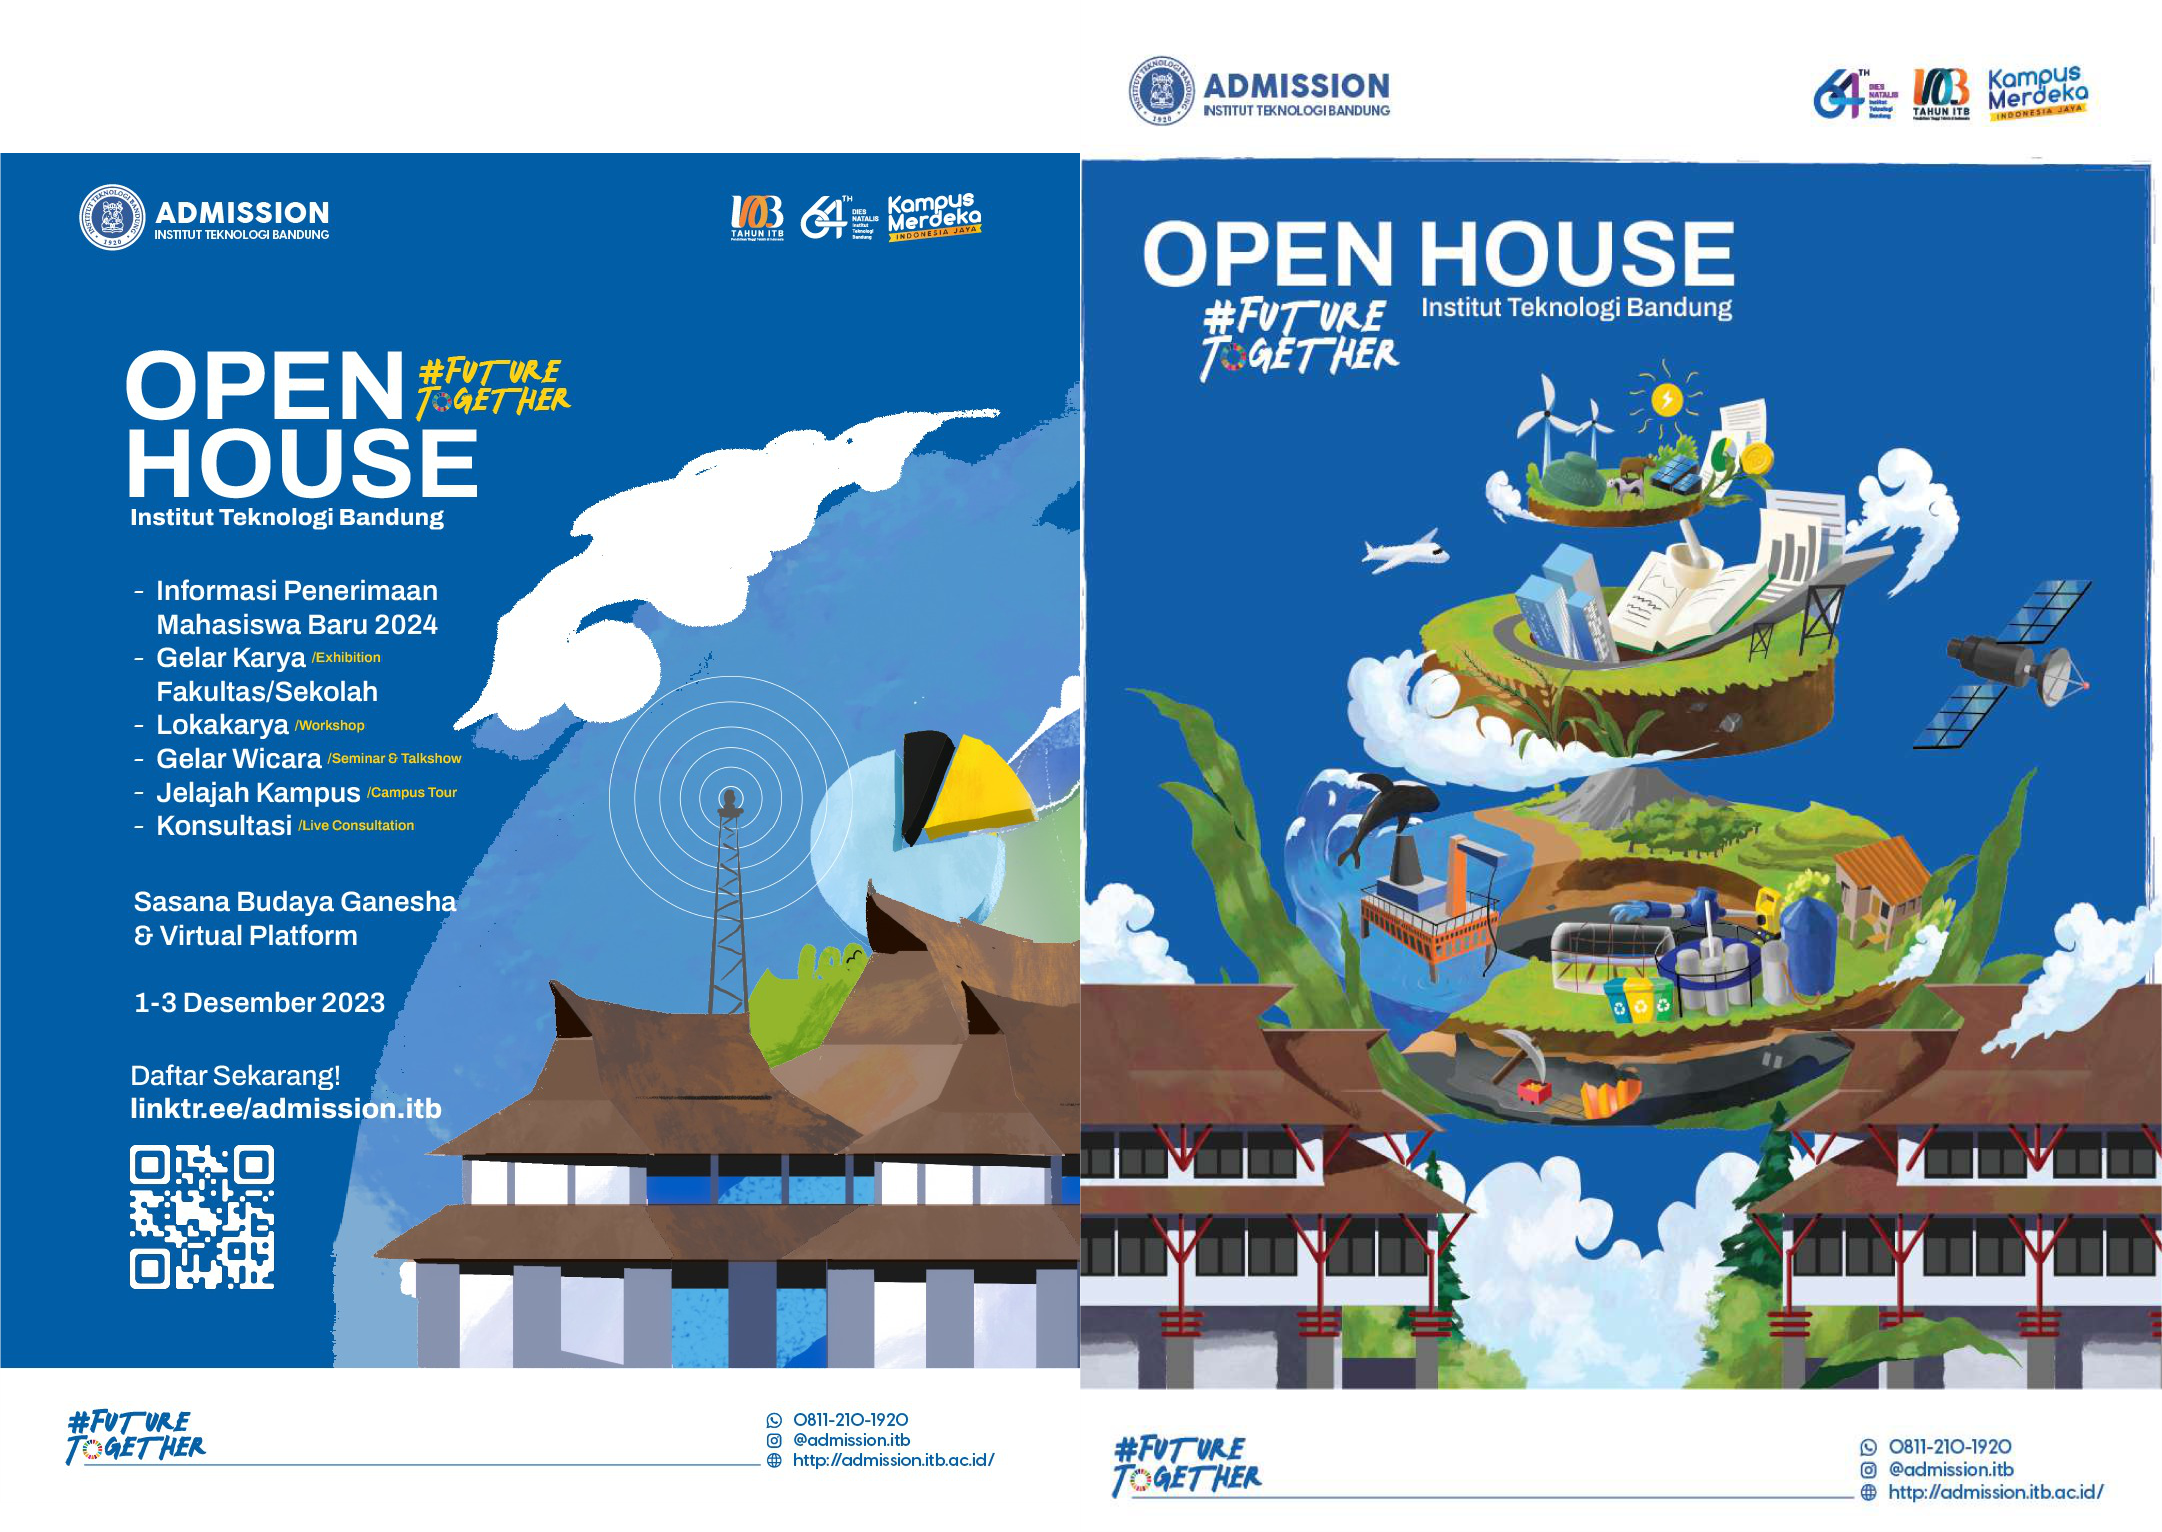 OPen house itb 2023